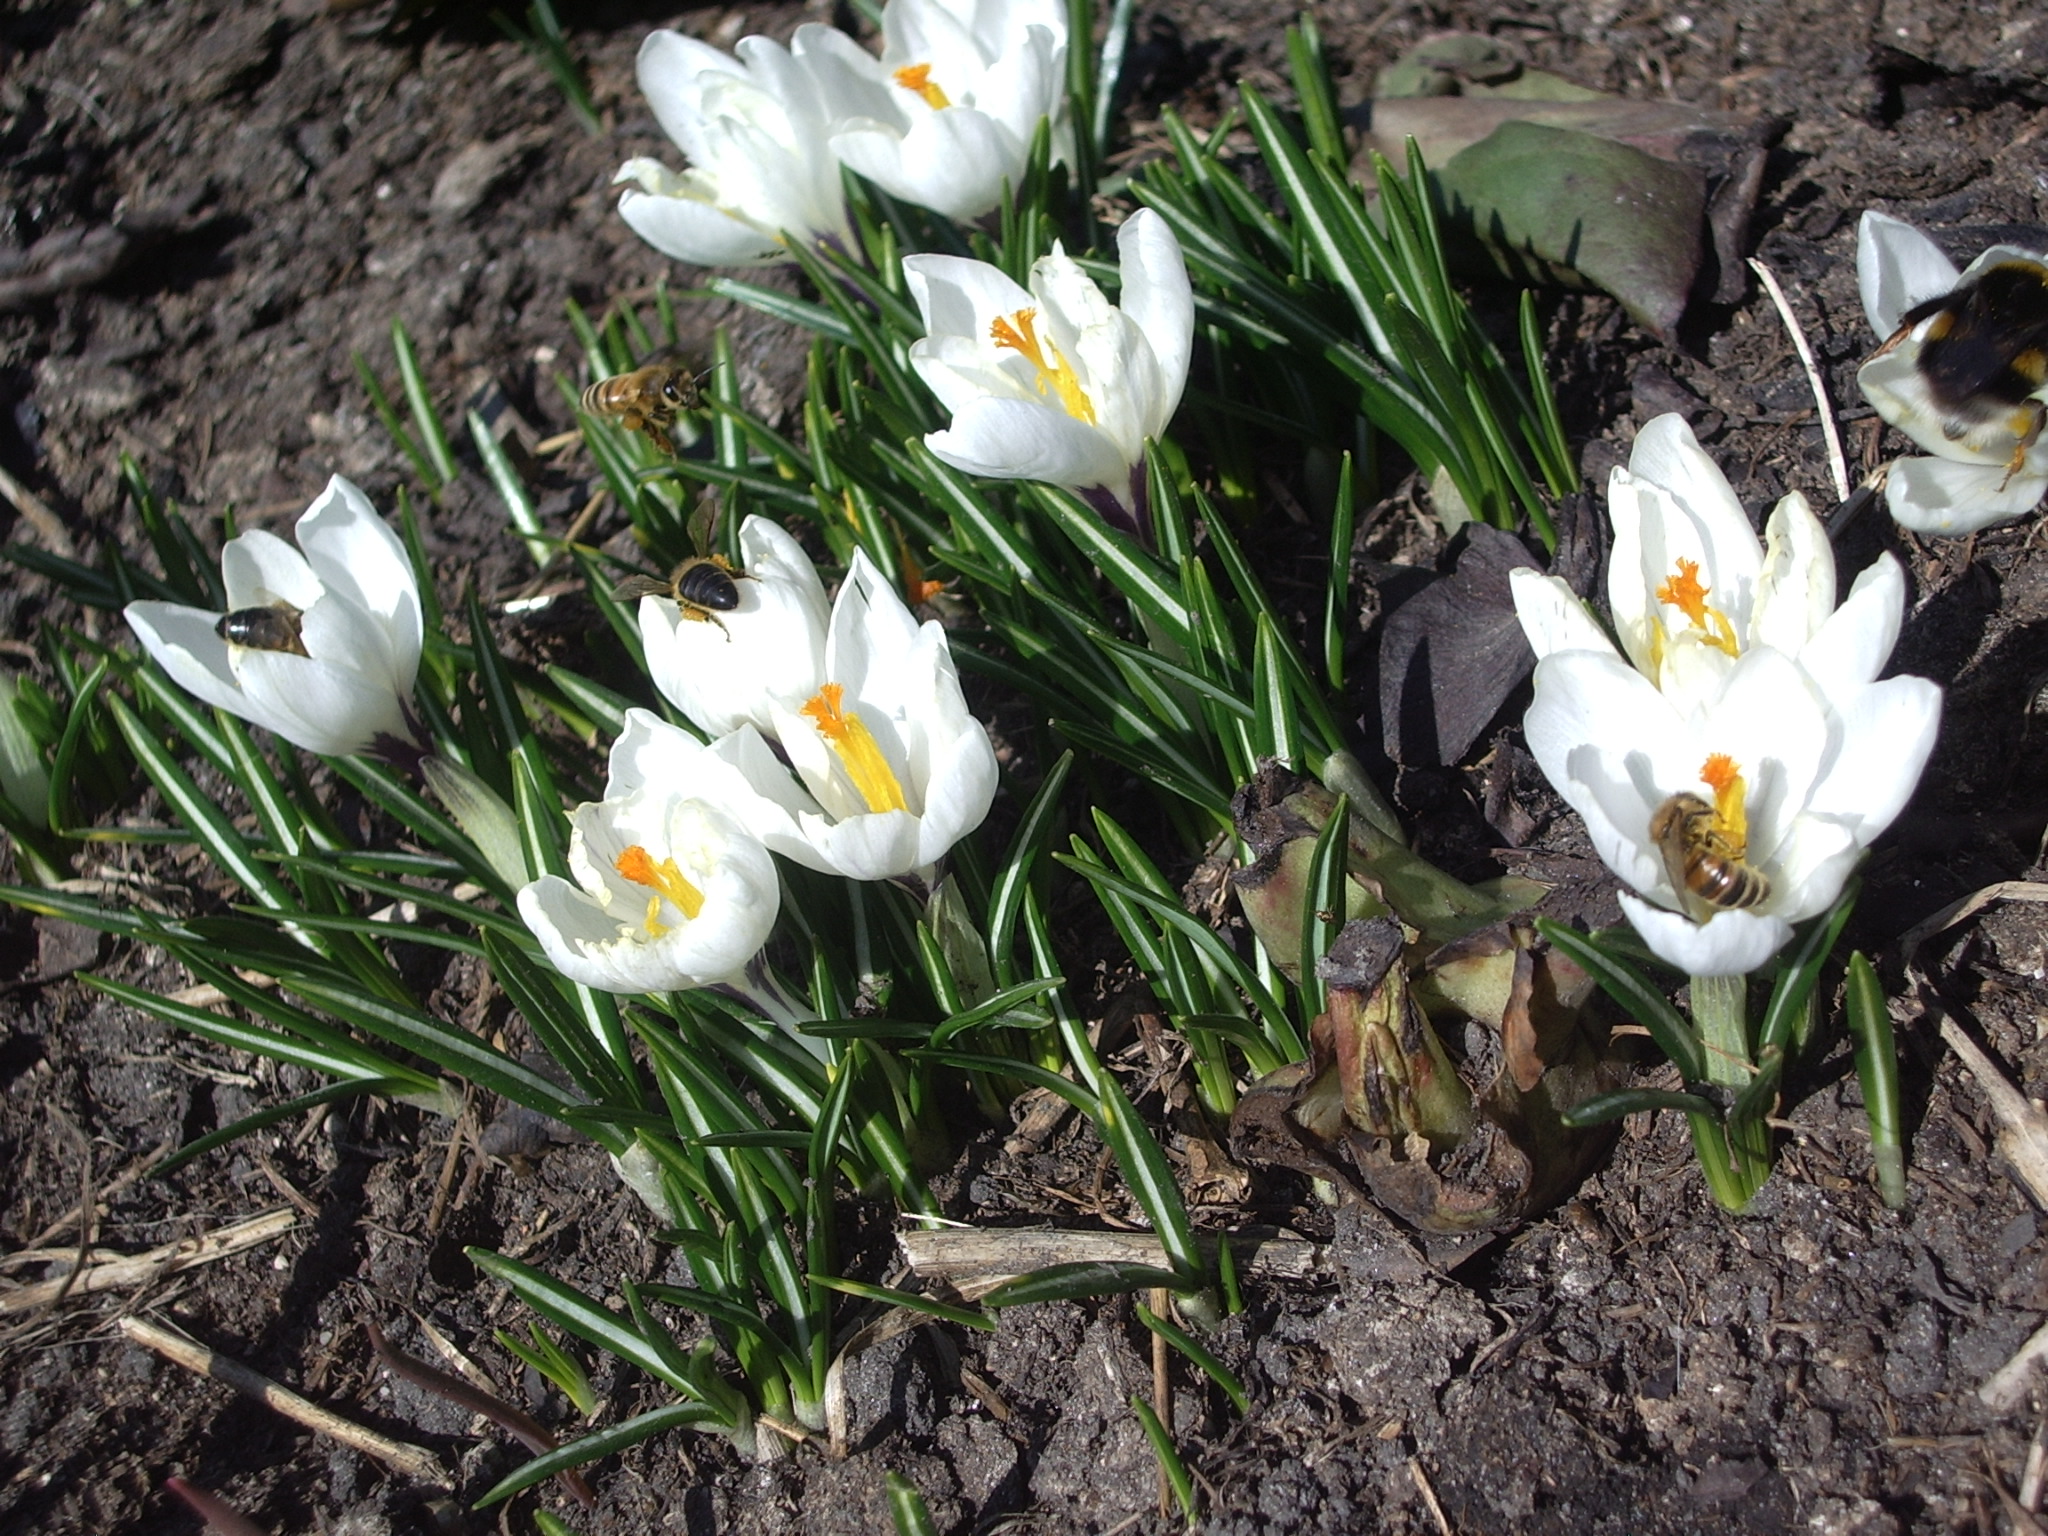 File:Bees on a white crocus.JPG - Wikimedia Commons